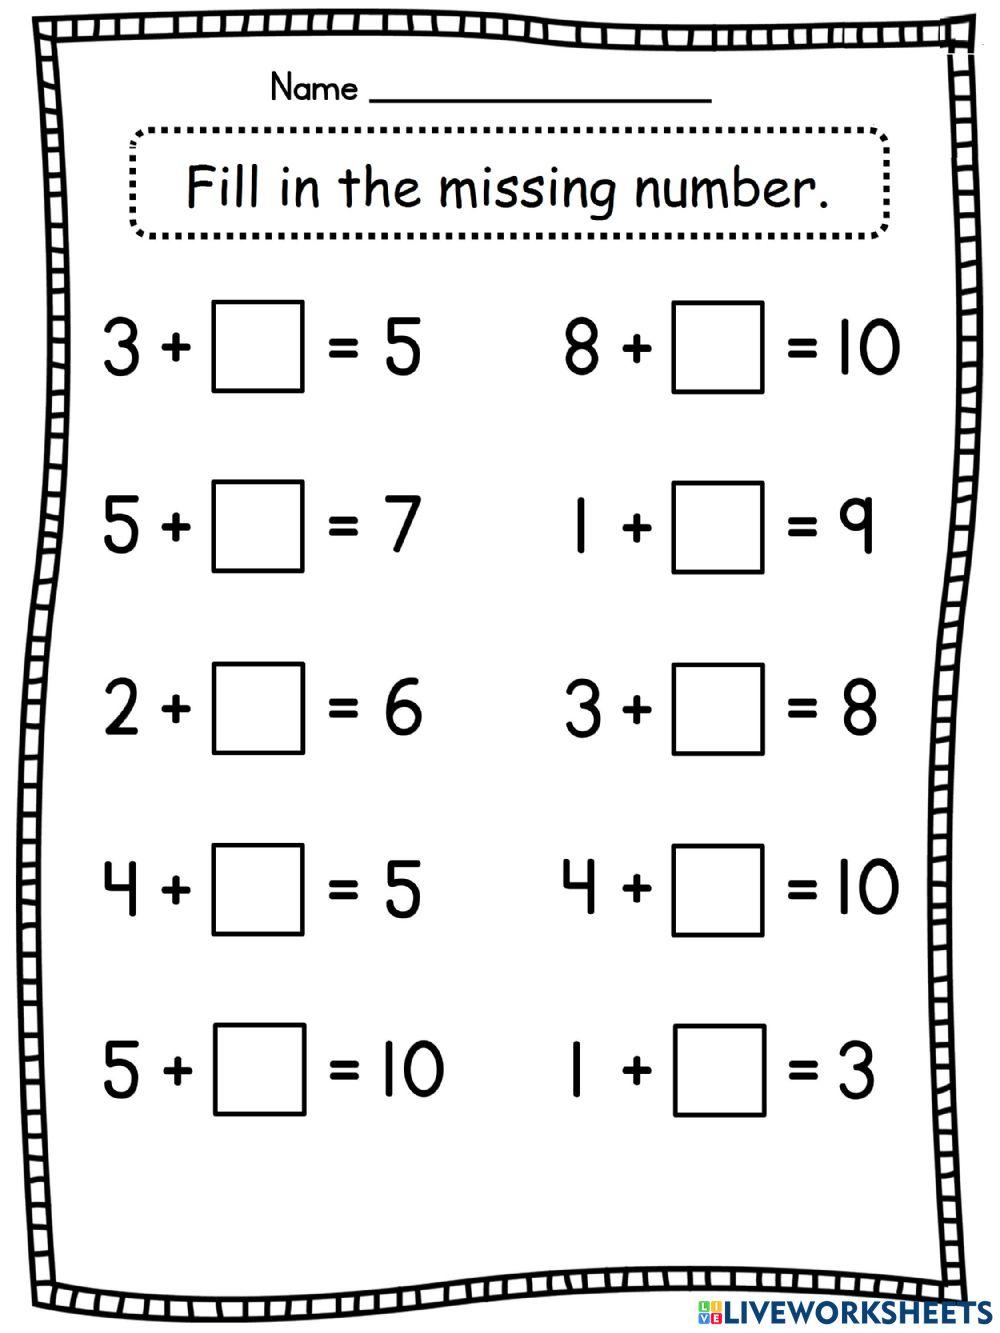 Fill in the missing number - 3